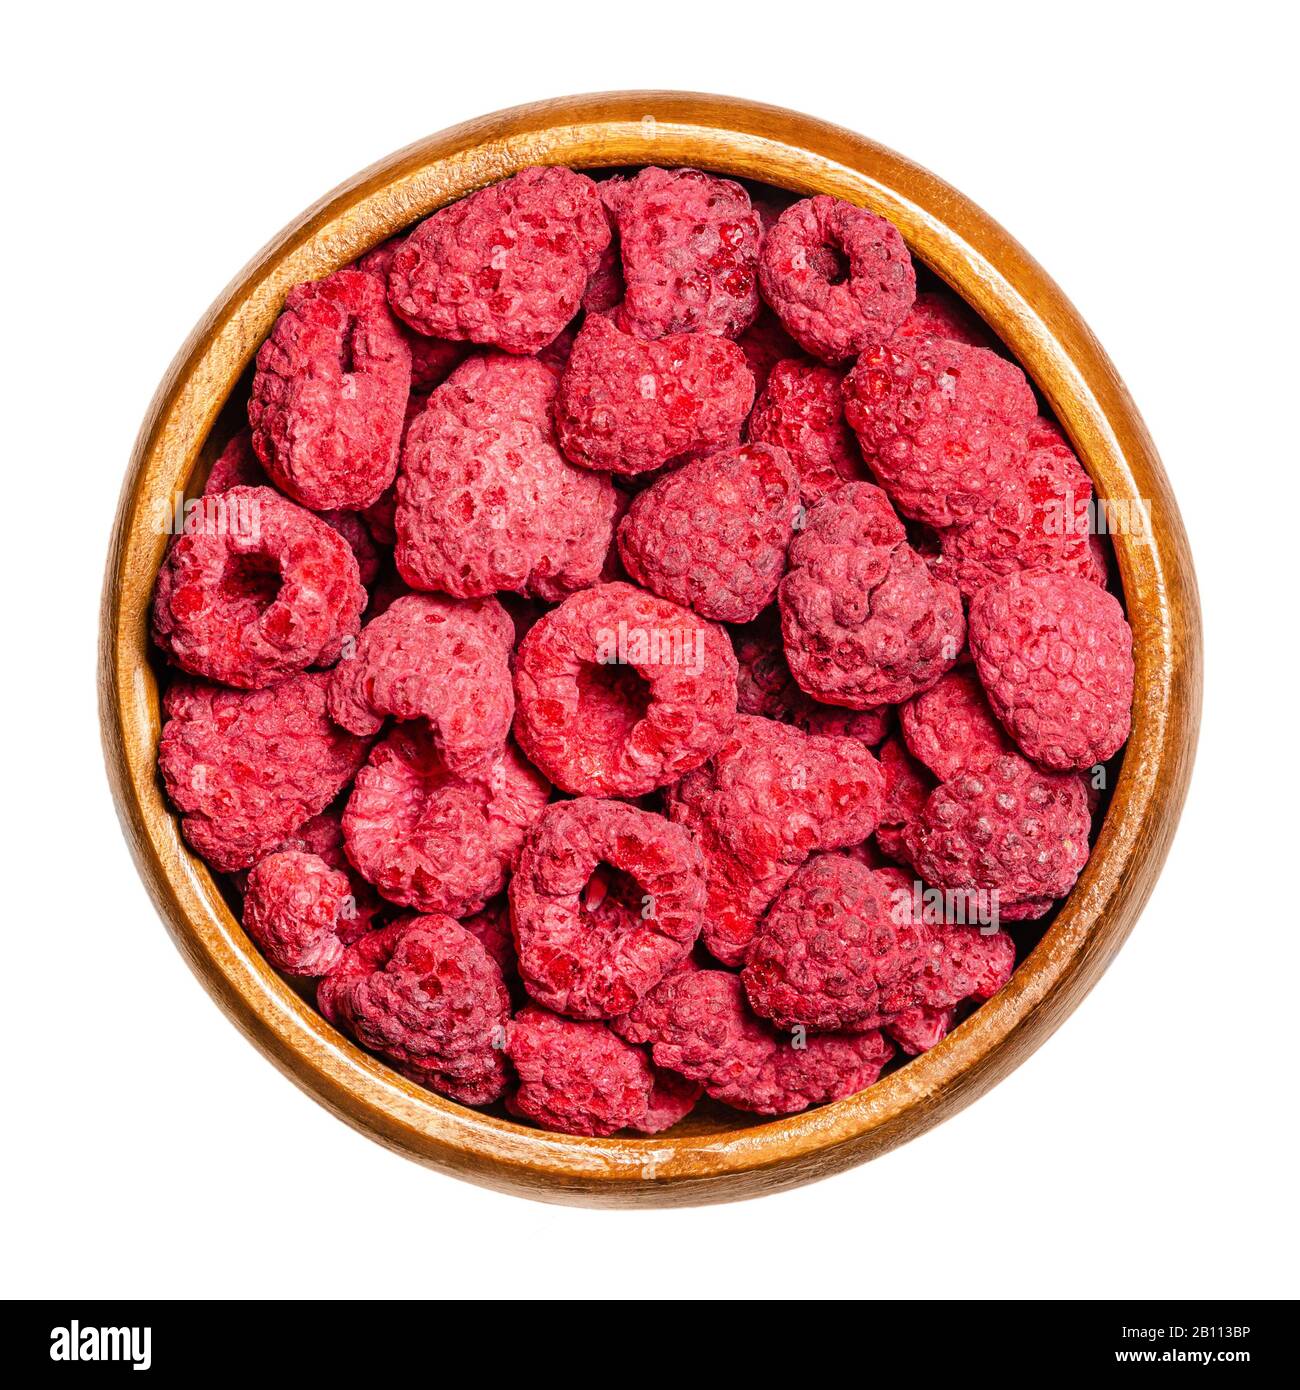 Dried whole raspberries in a wooden bowl. Edible, ripe, red and sweet fruits of Rubus idaeus, the cultivated European raspberry. Closeup, from above. Stock Photo